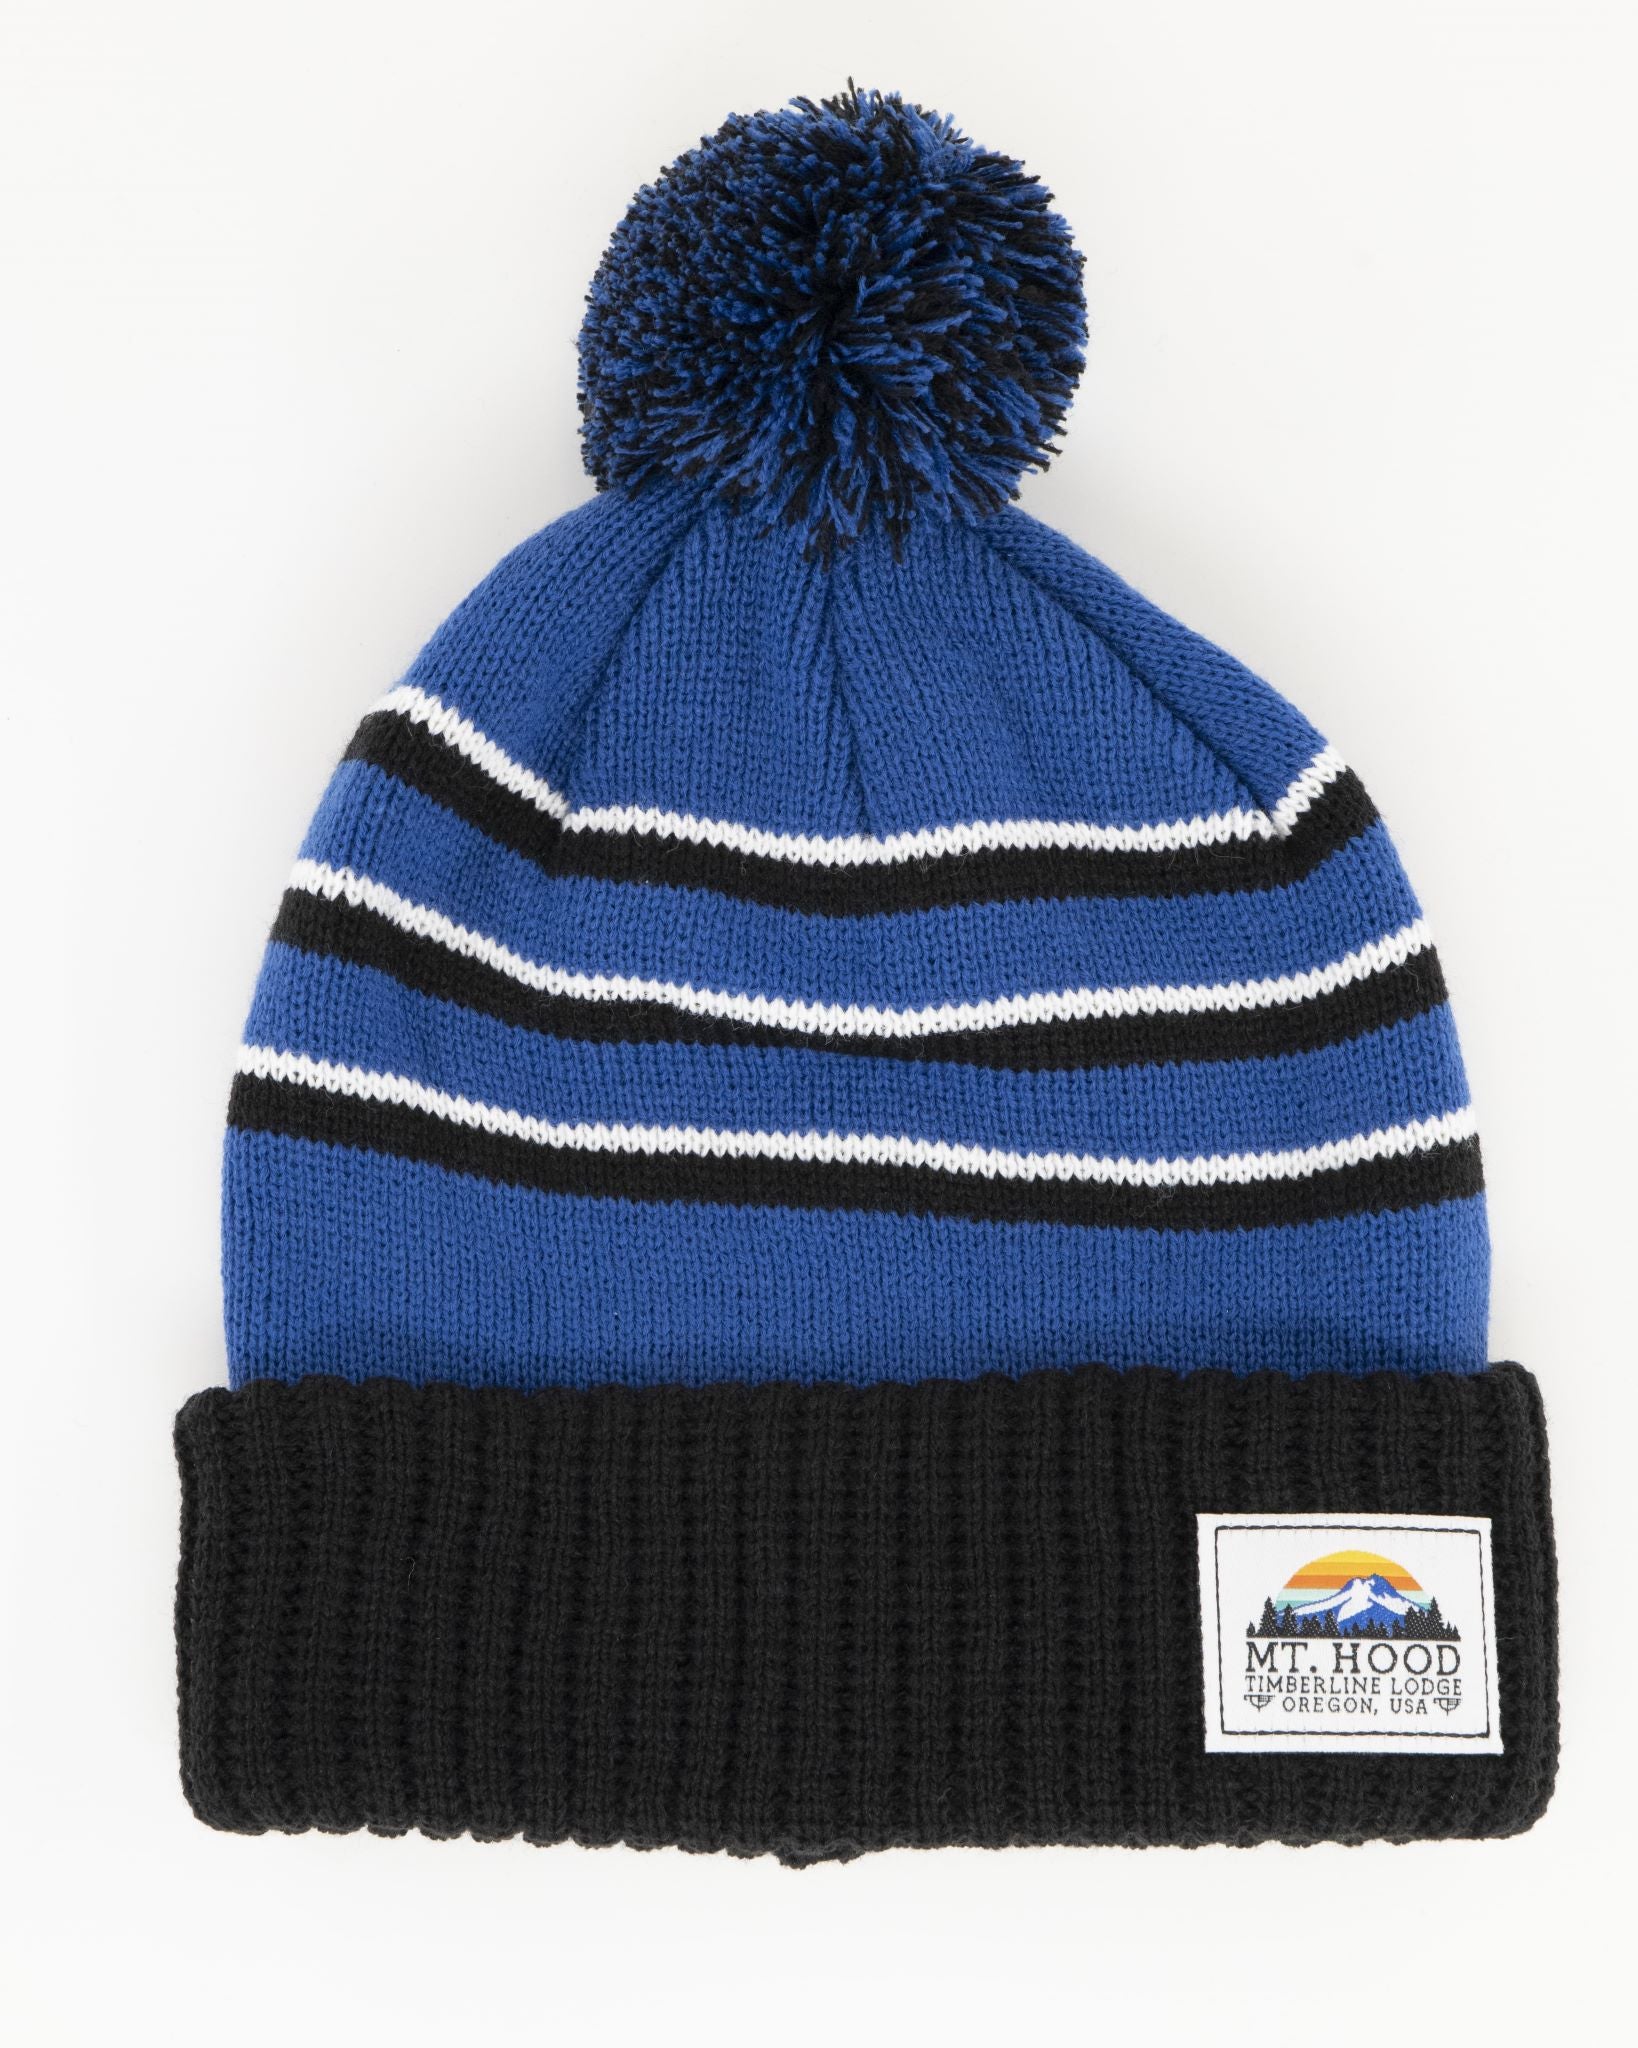 Pom Beanie - Daybreak - Available in Black, Grey, and White or Blue, Black, and White.